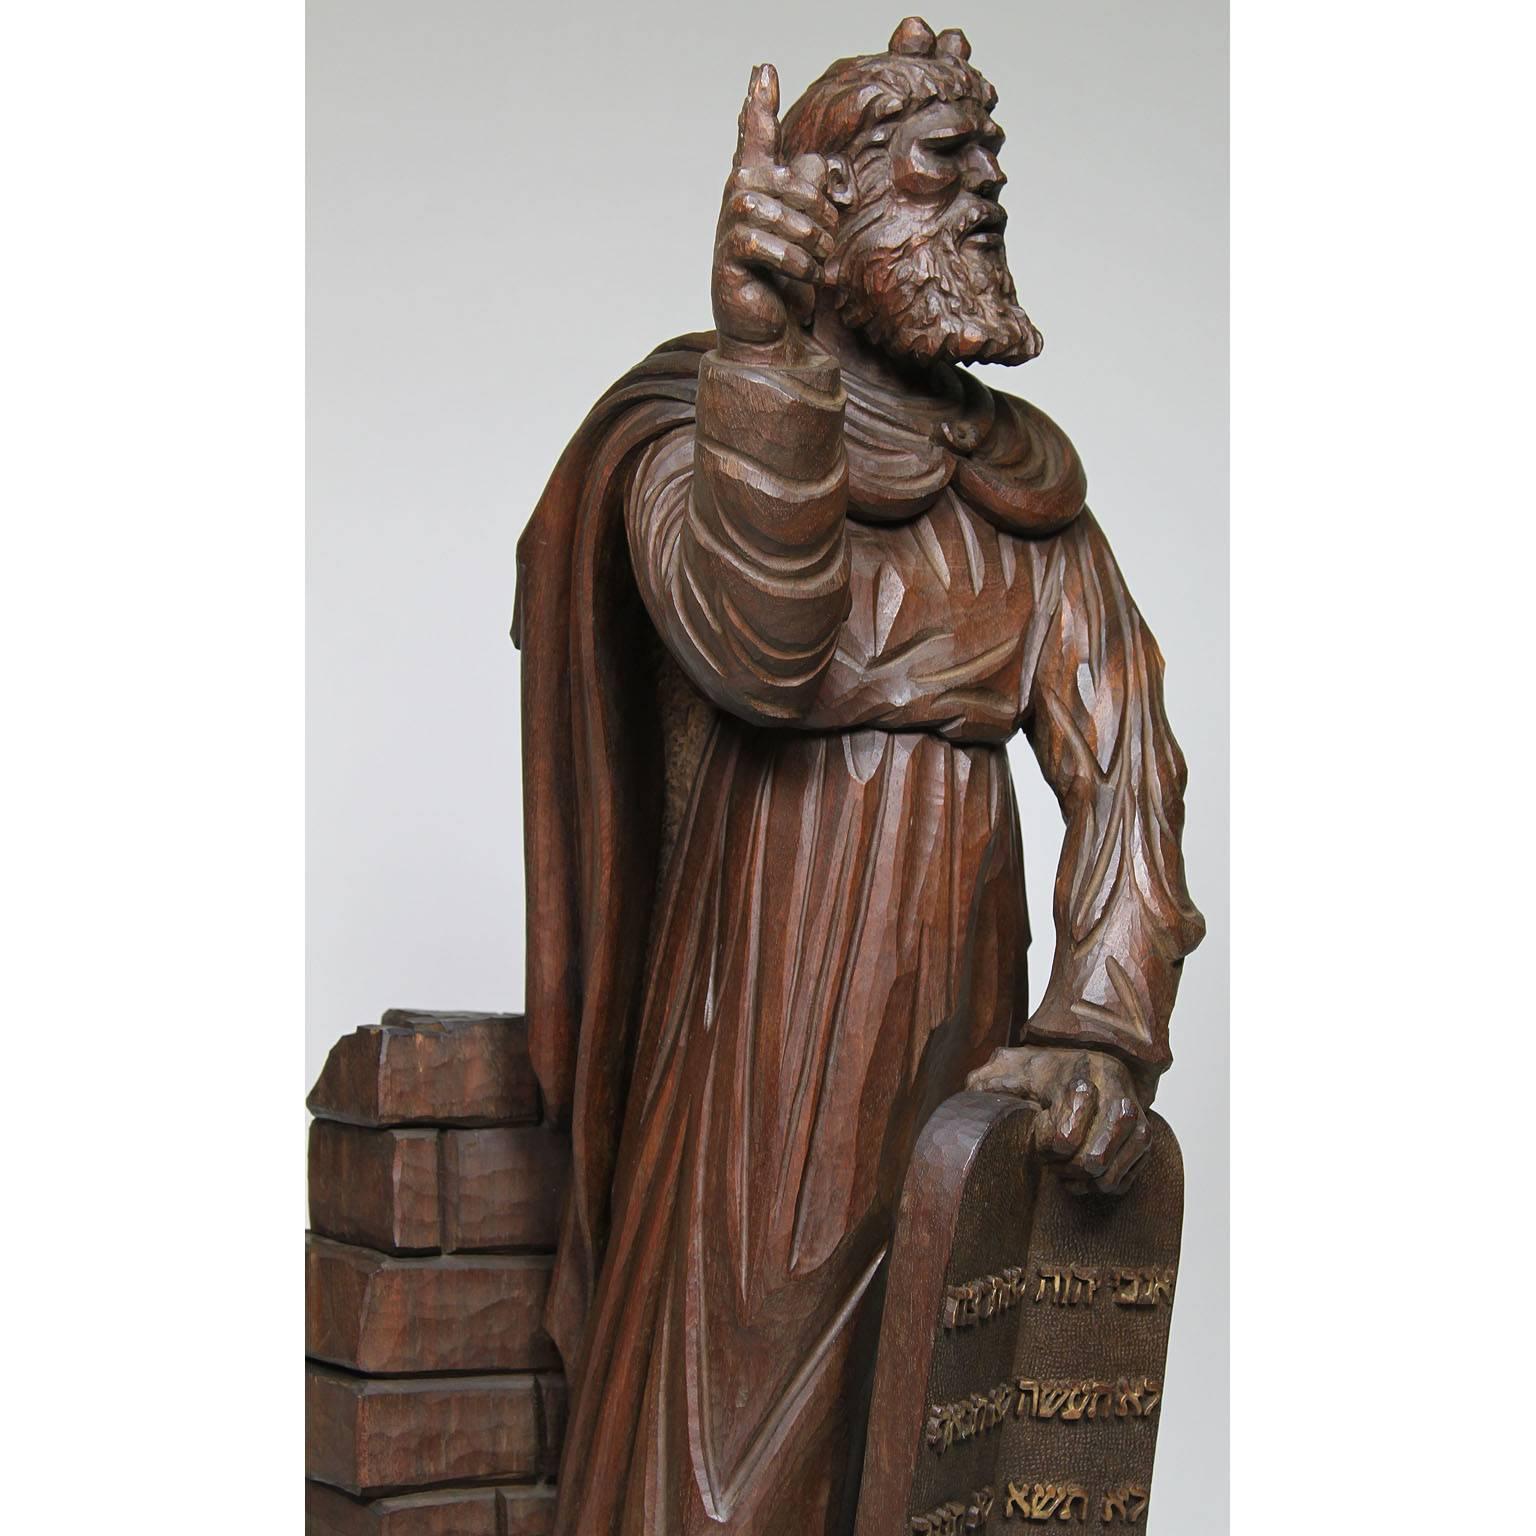 19th-20th Century Renaissance Carved Wood Judica Figure of Michelangelo's Moses For Sale 3